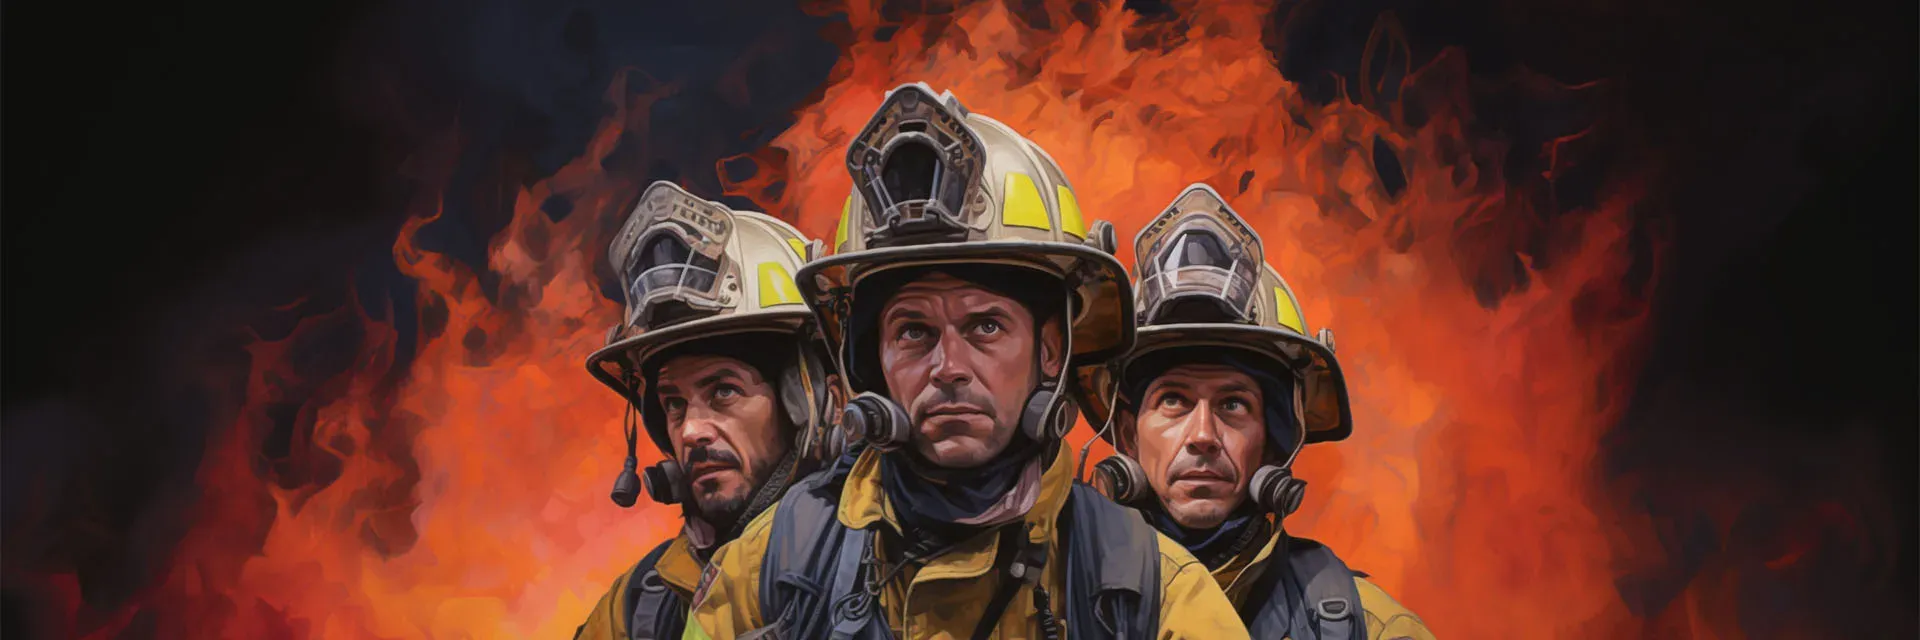 Firefighters in front of flames